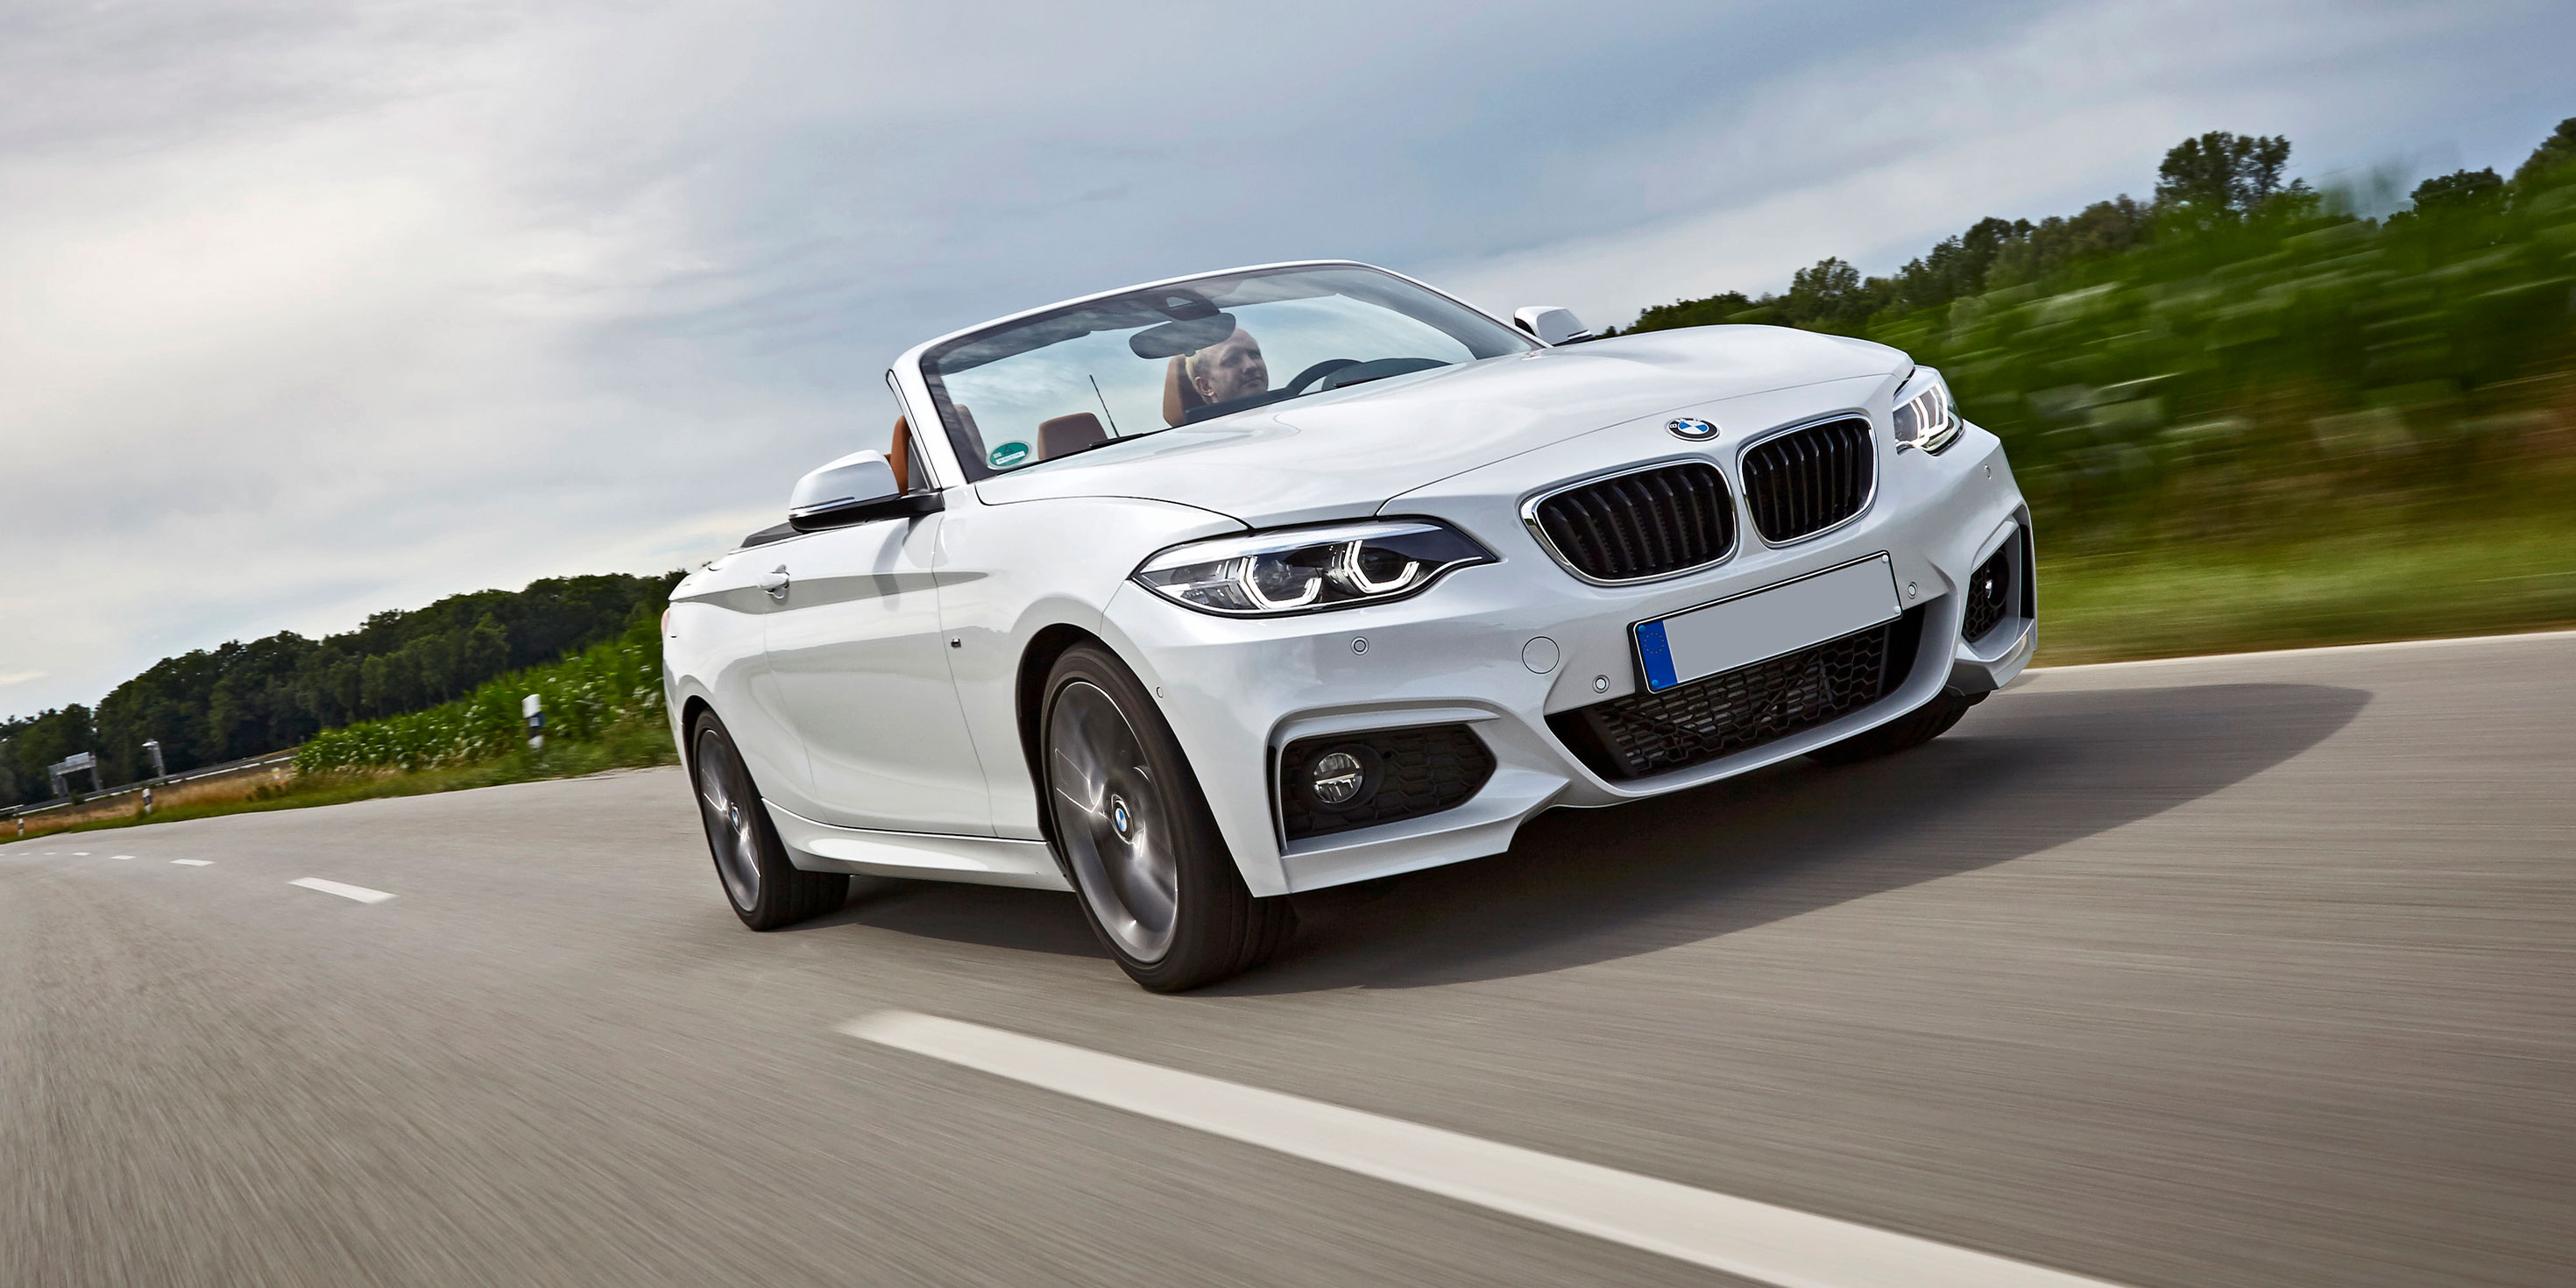 bmw 2 series cabriolet luggage space